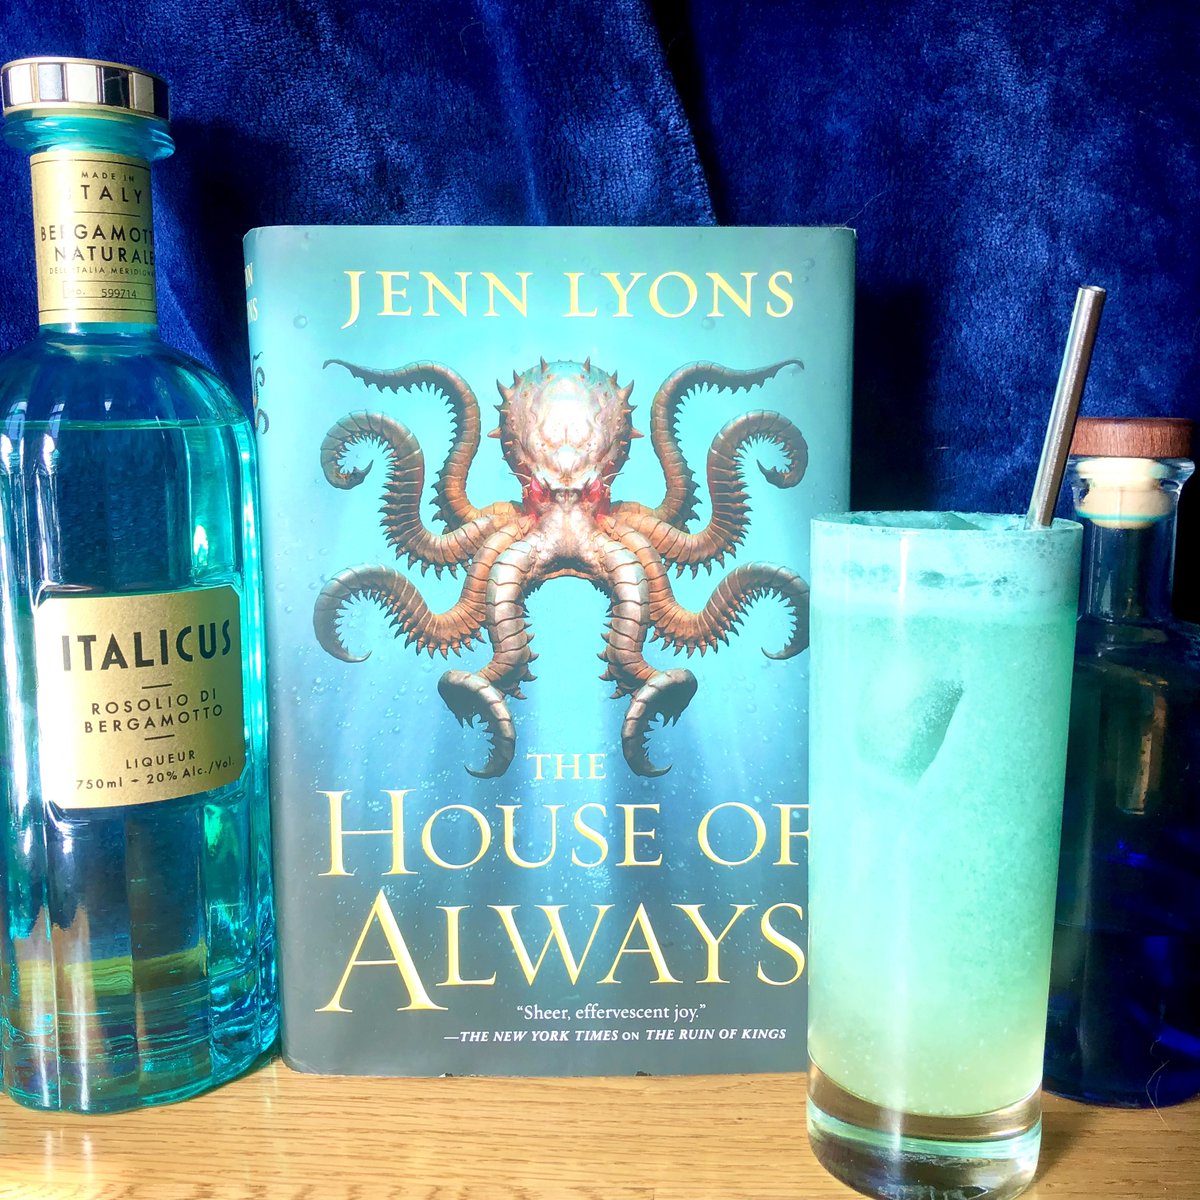 NEW VIDEO ALERT! Today on Bar Cart Bookshelf we’re continuing our ACOD reread with THE HOUSE OF ALWAYS by @jennlyonsauthor! High seas & houses outside time build to the grand finale. Our drink, Chain the Lash, is a personal favorite: a tropical refresher with a bittersweet twist!